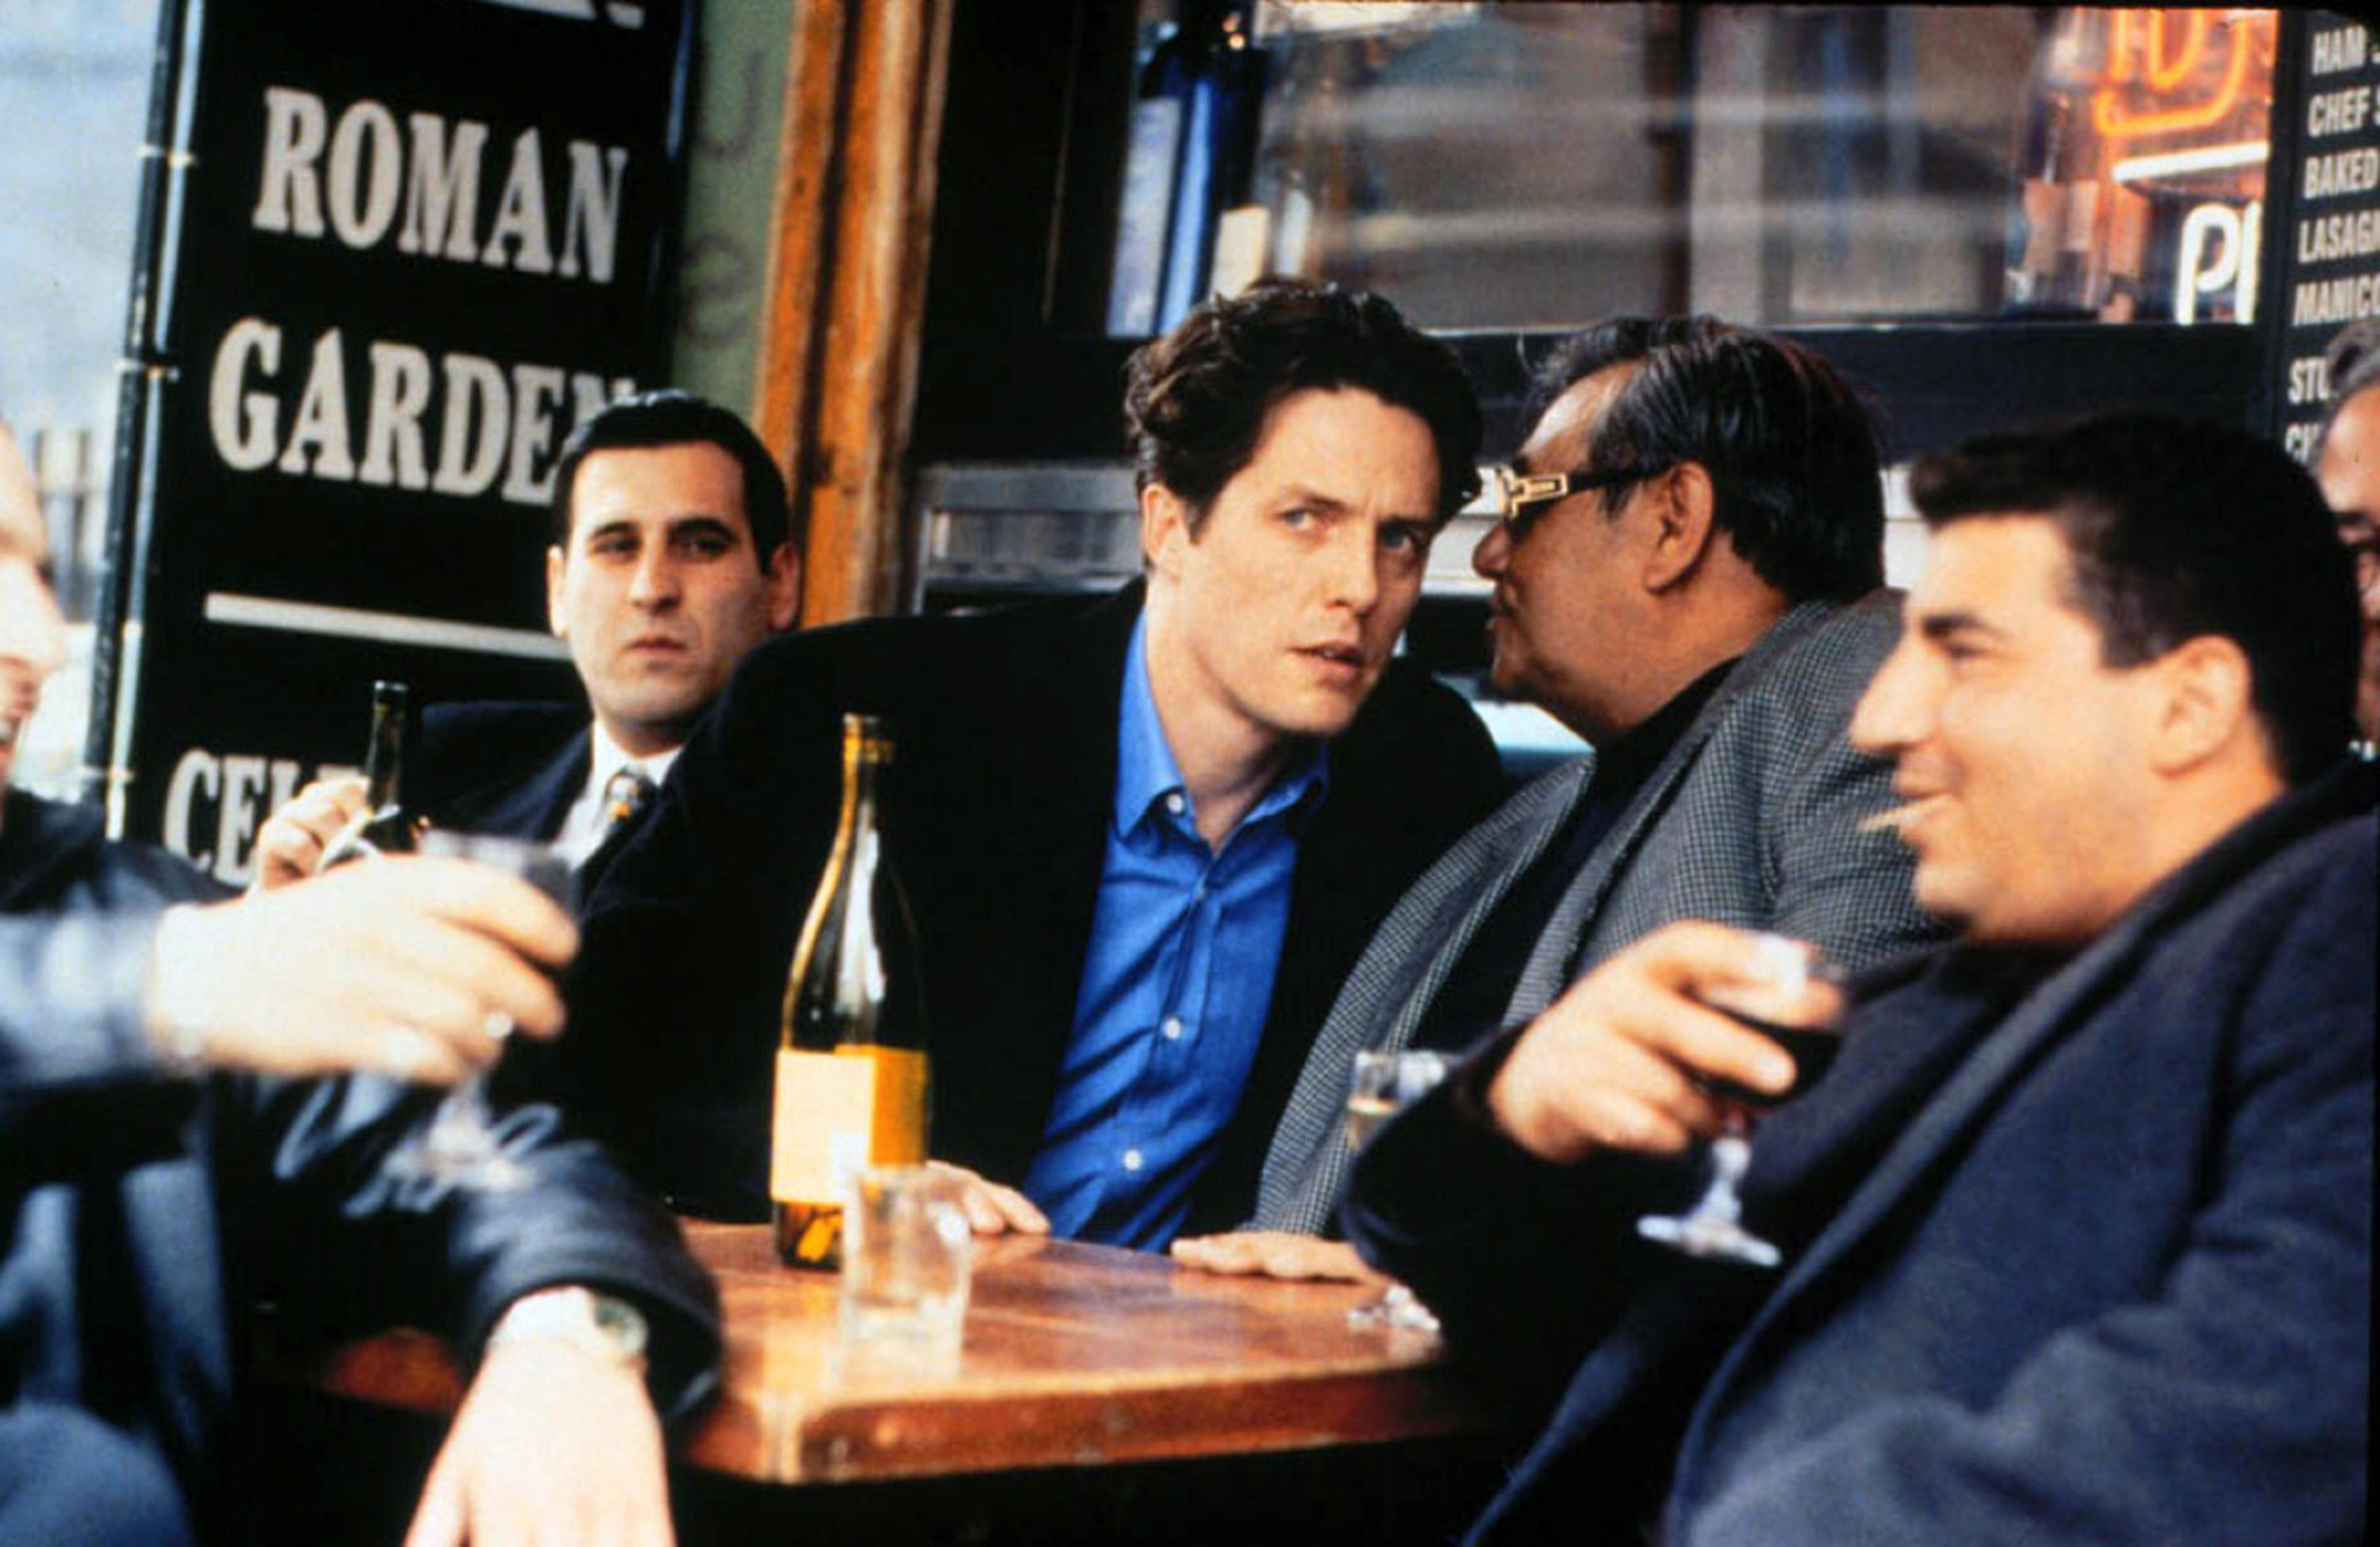 A confused young man in a black jacket and blue shirt stares out while having a drink with well-dressed gangsters